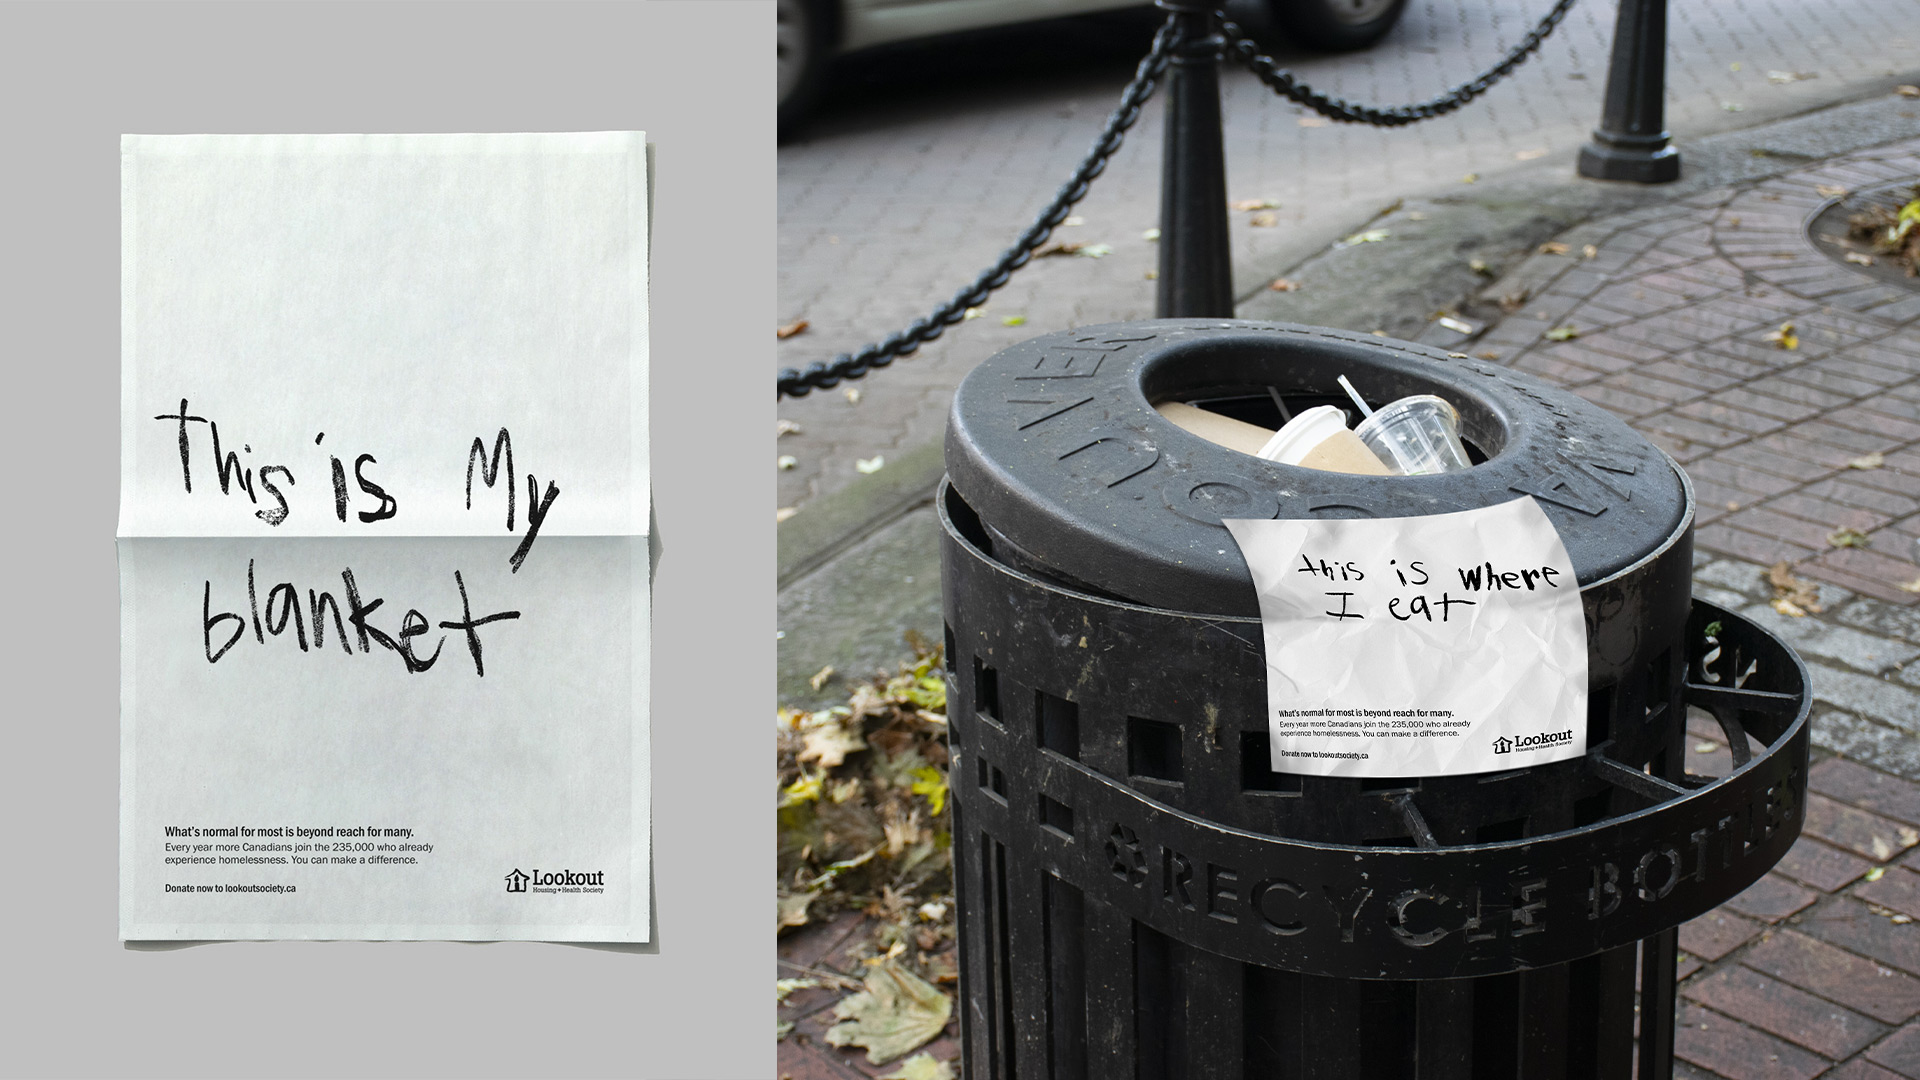 Collateral design and guerilla advertising design for Days without… campaign that shows homeless people using newspapers as blankets and garbage cans as their source of food. This student advertising and design project was made for Lookout Society to address Vancouver’s homeless crisis and spread awareness.